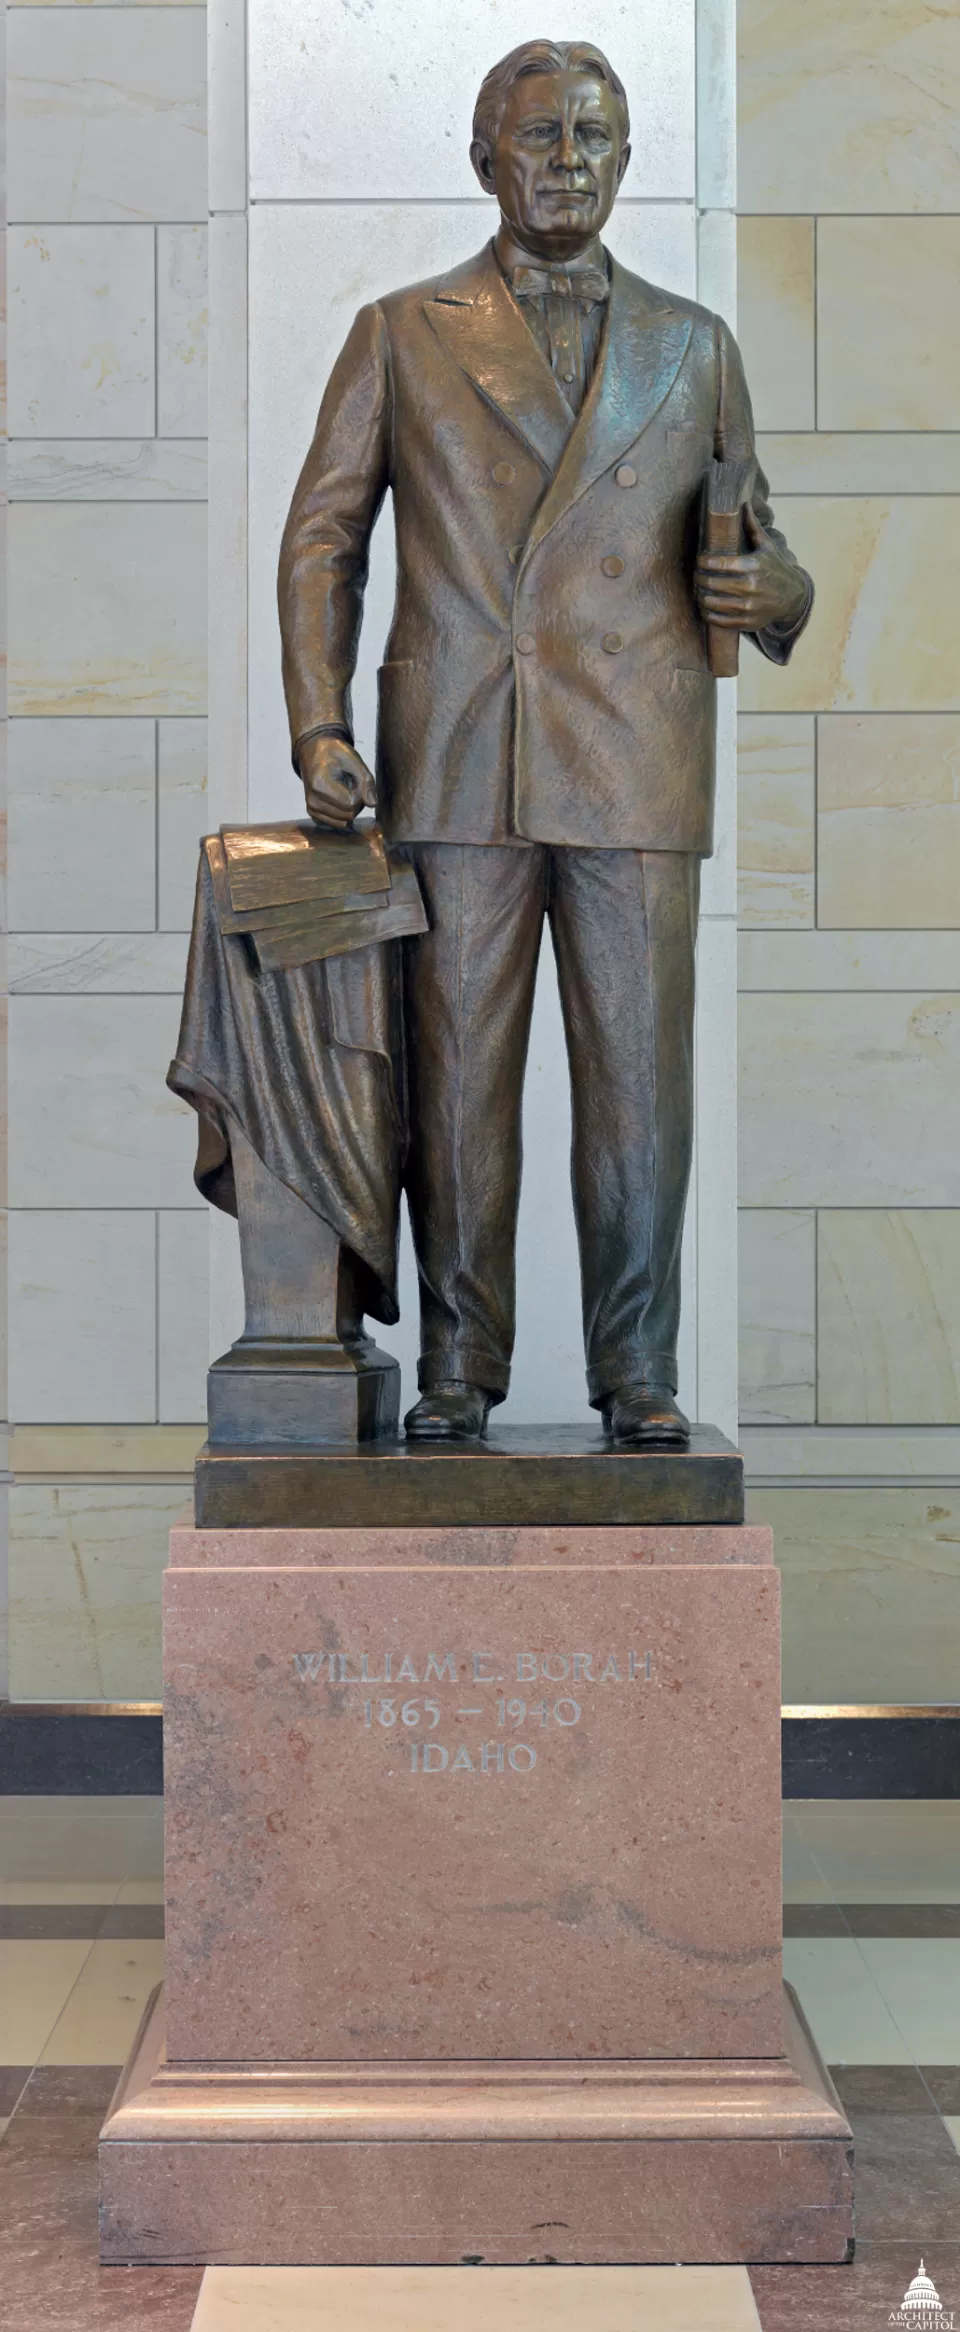 This statue of Senator William Edgar Borah was given to the National Statuary Hall Collection by Idaho in 1947.